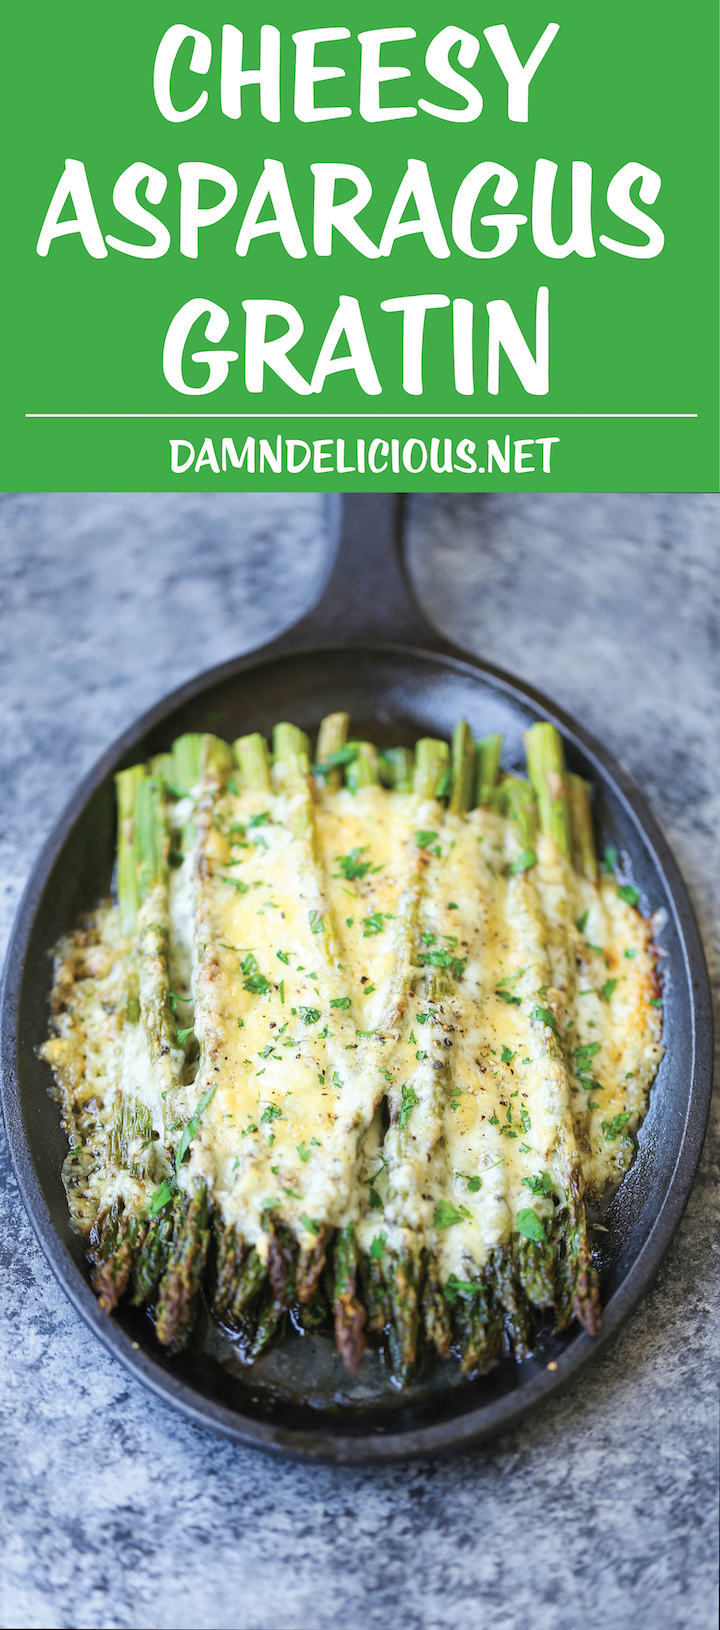 Cheesy Asparagus Gratin - A 5-min appetizer (or side dish)! Simply roast your asparagus with desired herbs, top with cheese and bake until cheesy goodness!